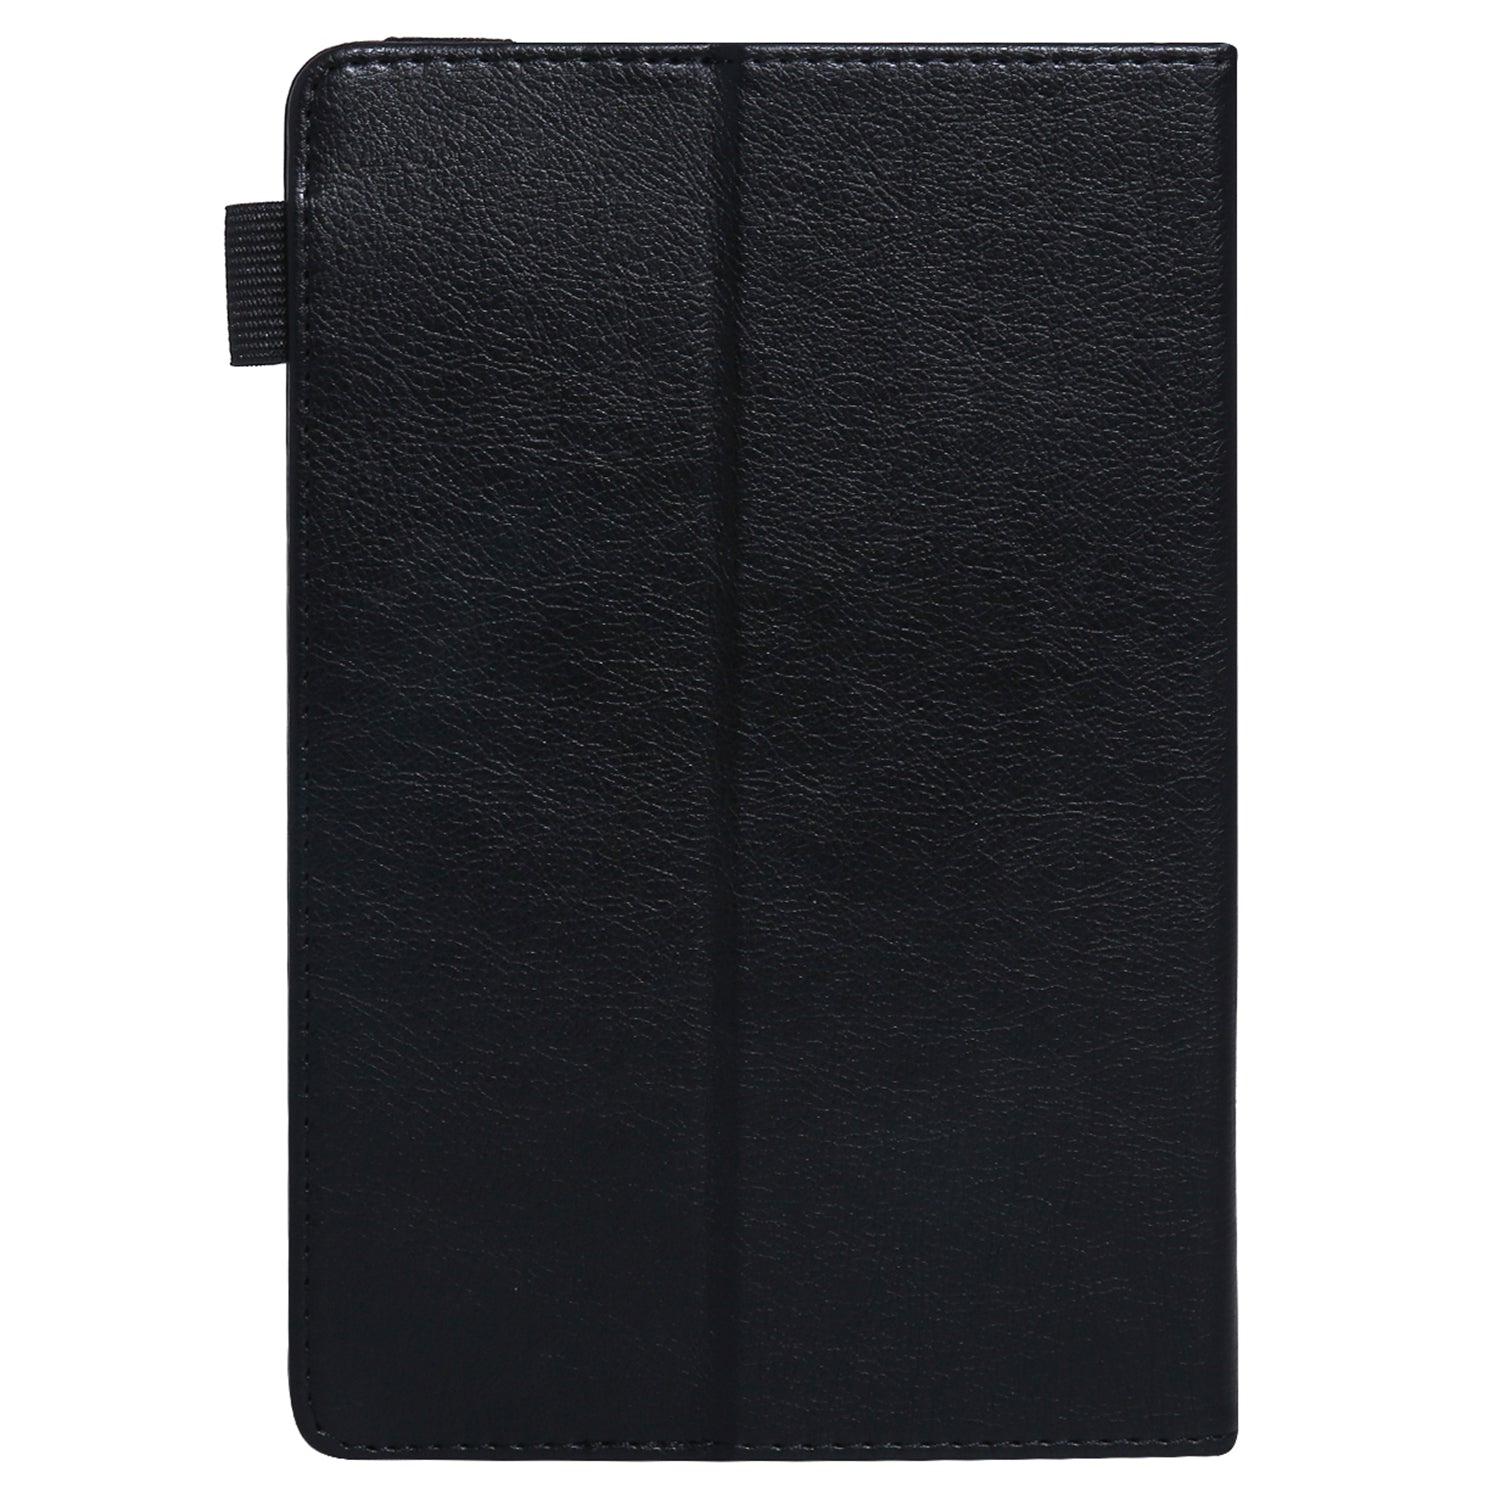 10-inch Tablet Case Card Slots PU Leather Flip Cover with Folding Stand - Black